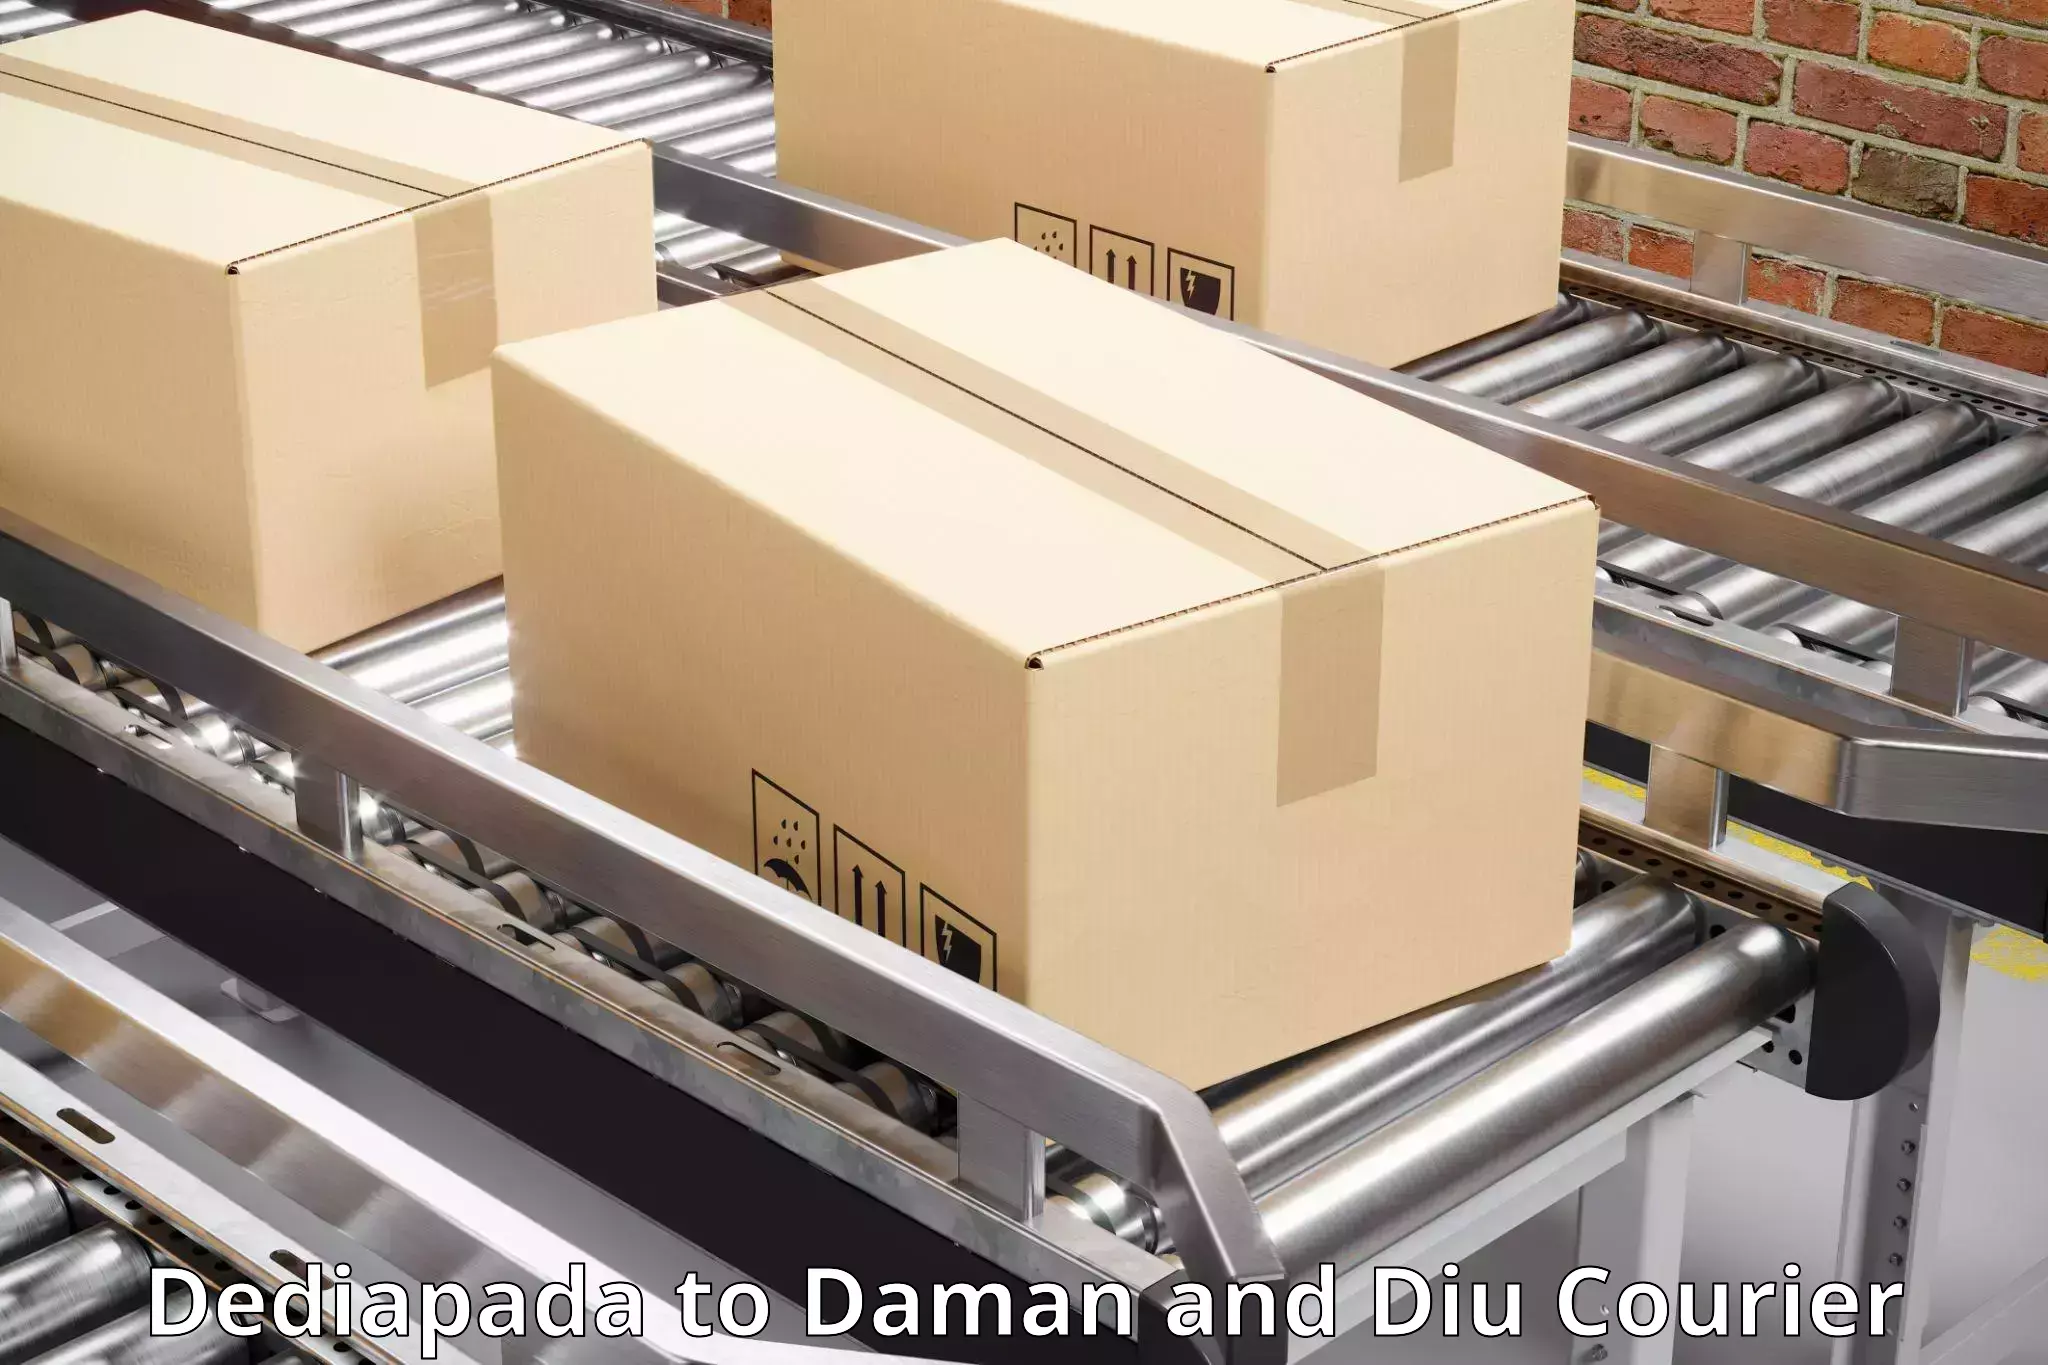 Personal parcel delivery in Dediapada to Daman and Diu